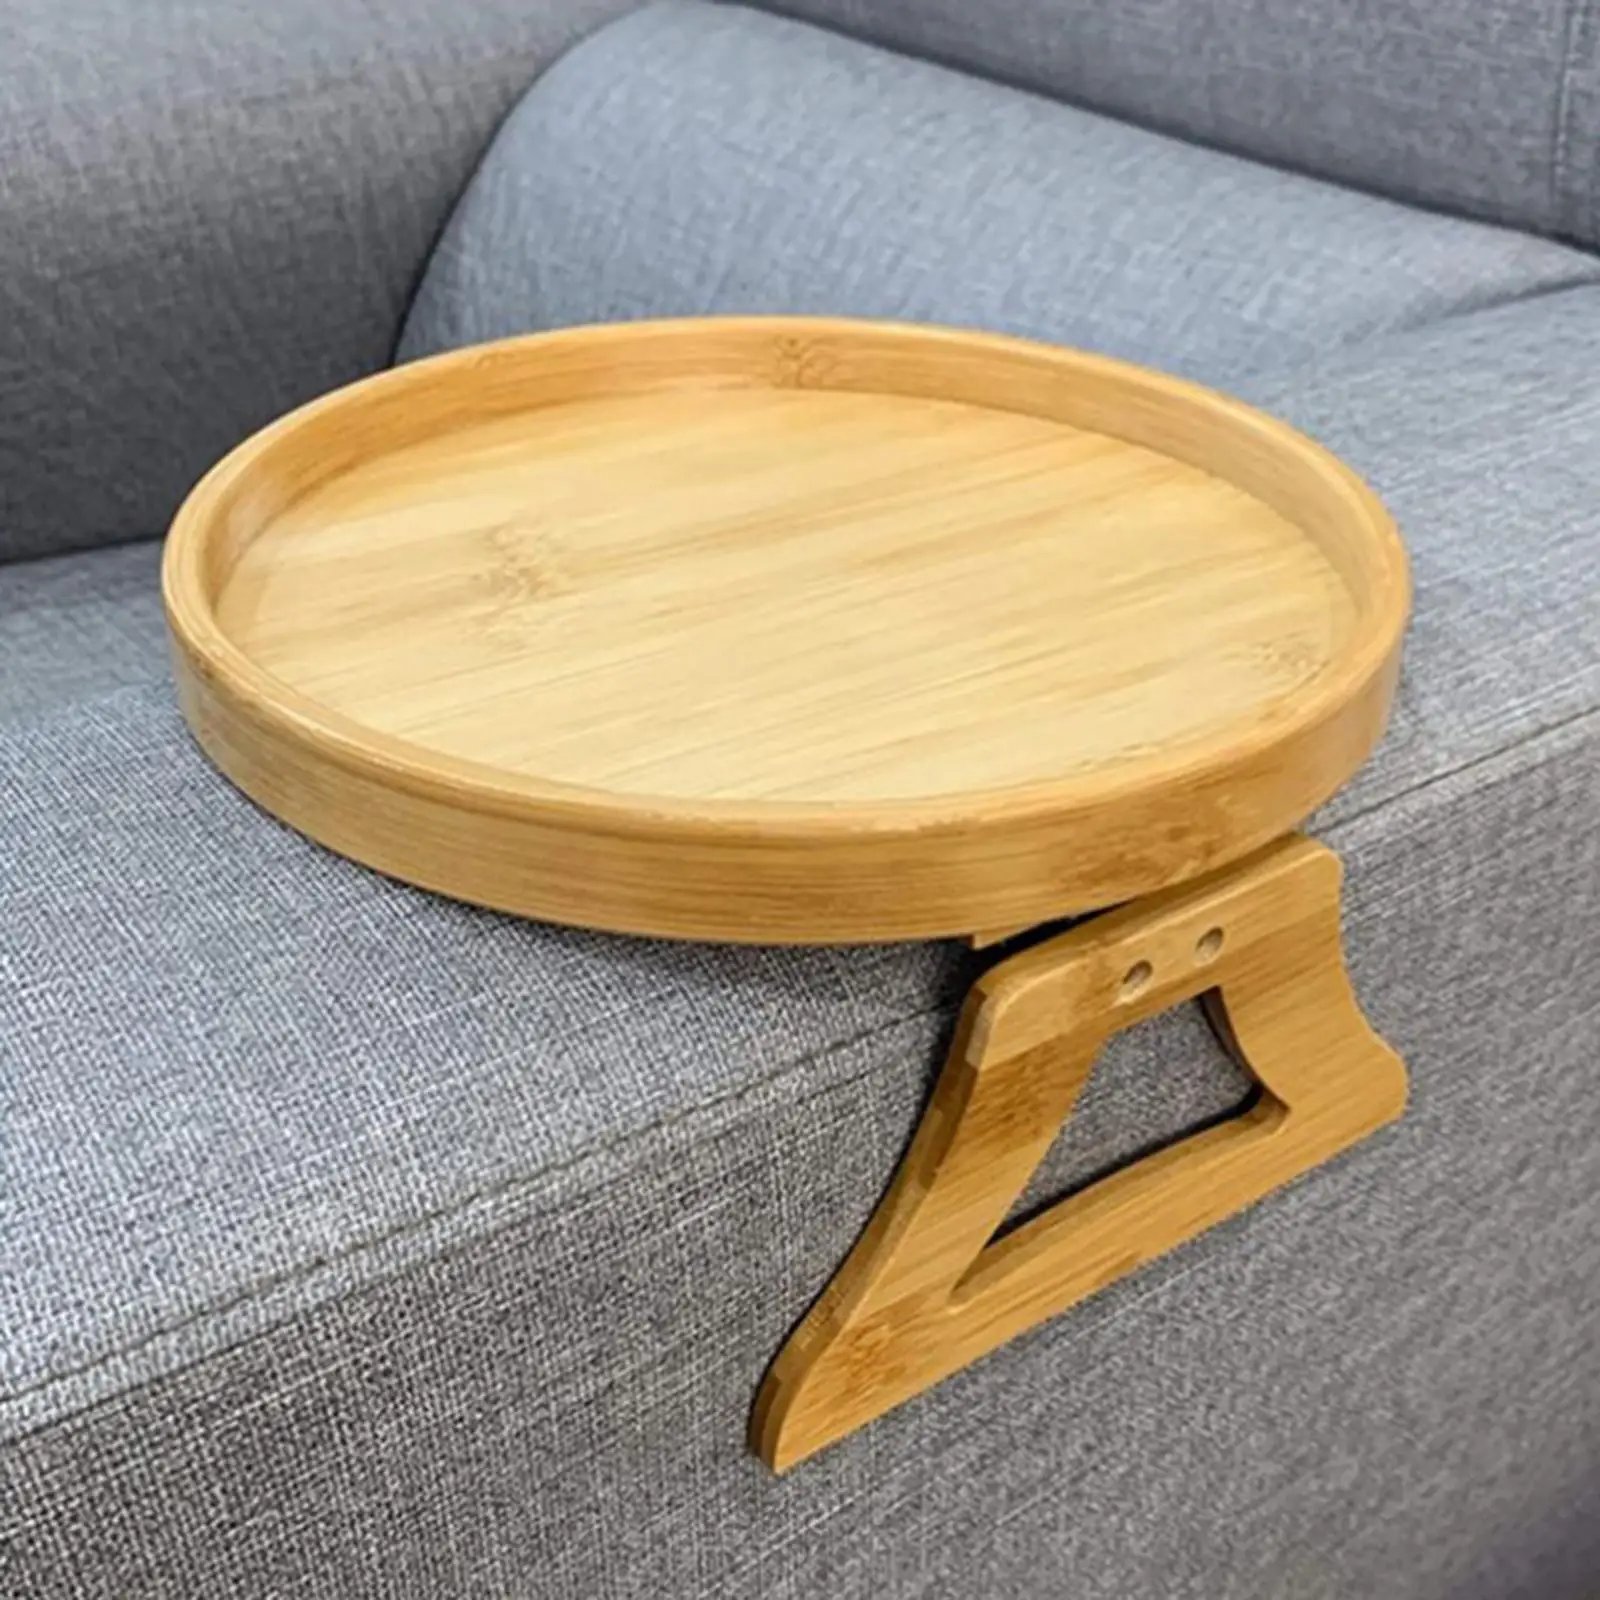 Rround Sofa Armrest Clip-on Tray, Unique Wooden Tableware Plates Side Tables, Platter for Remote Coffee Fruit Dessert